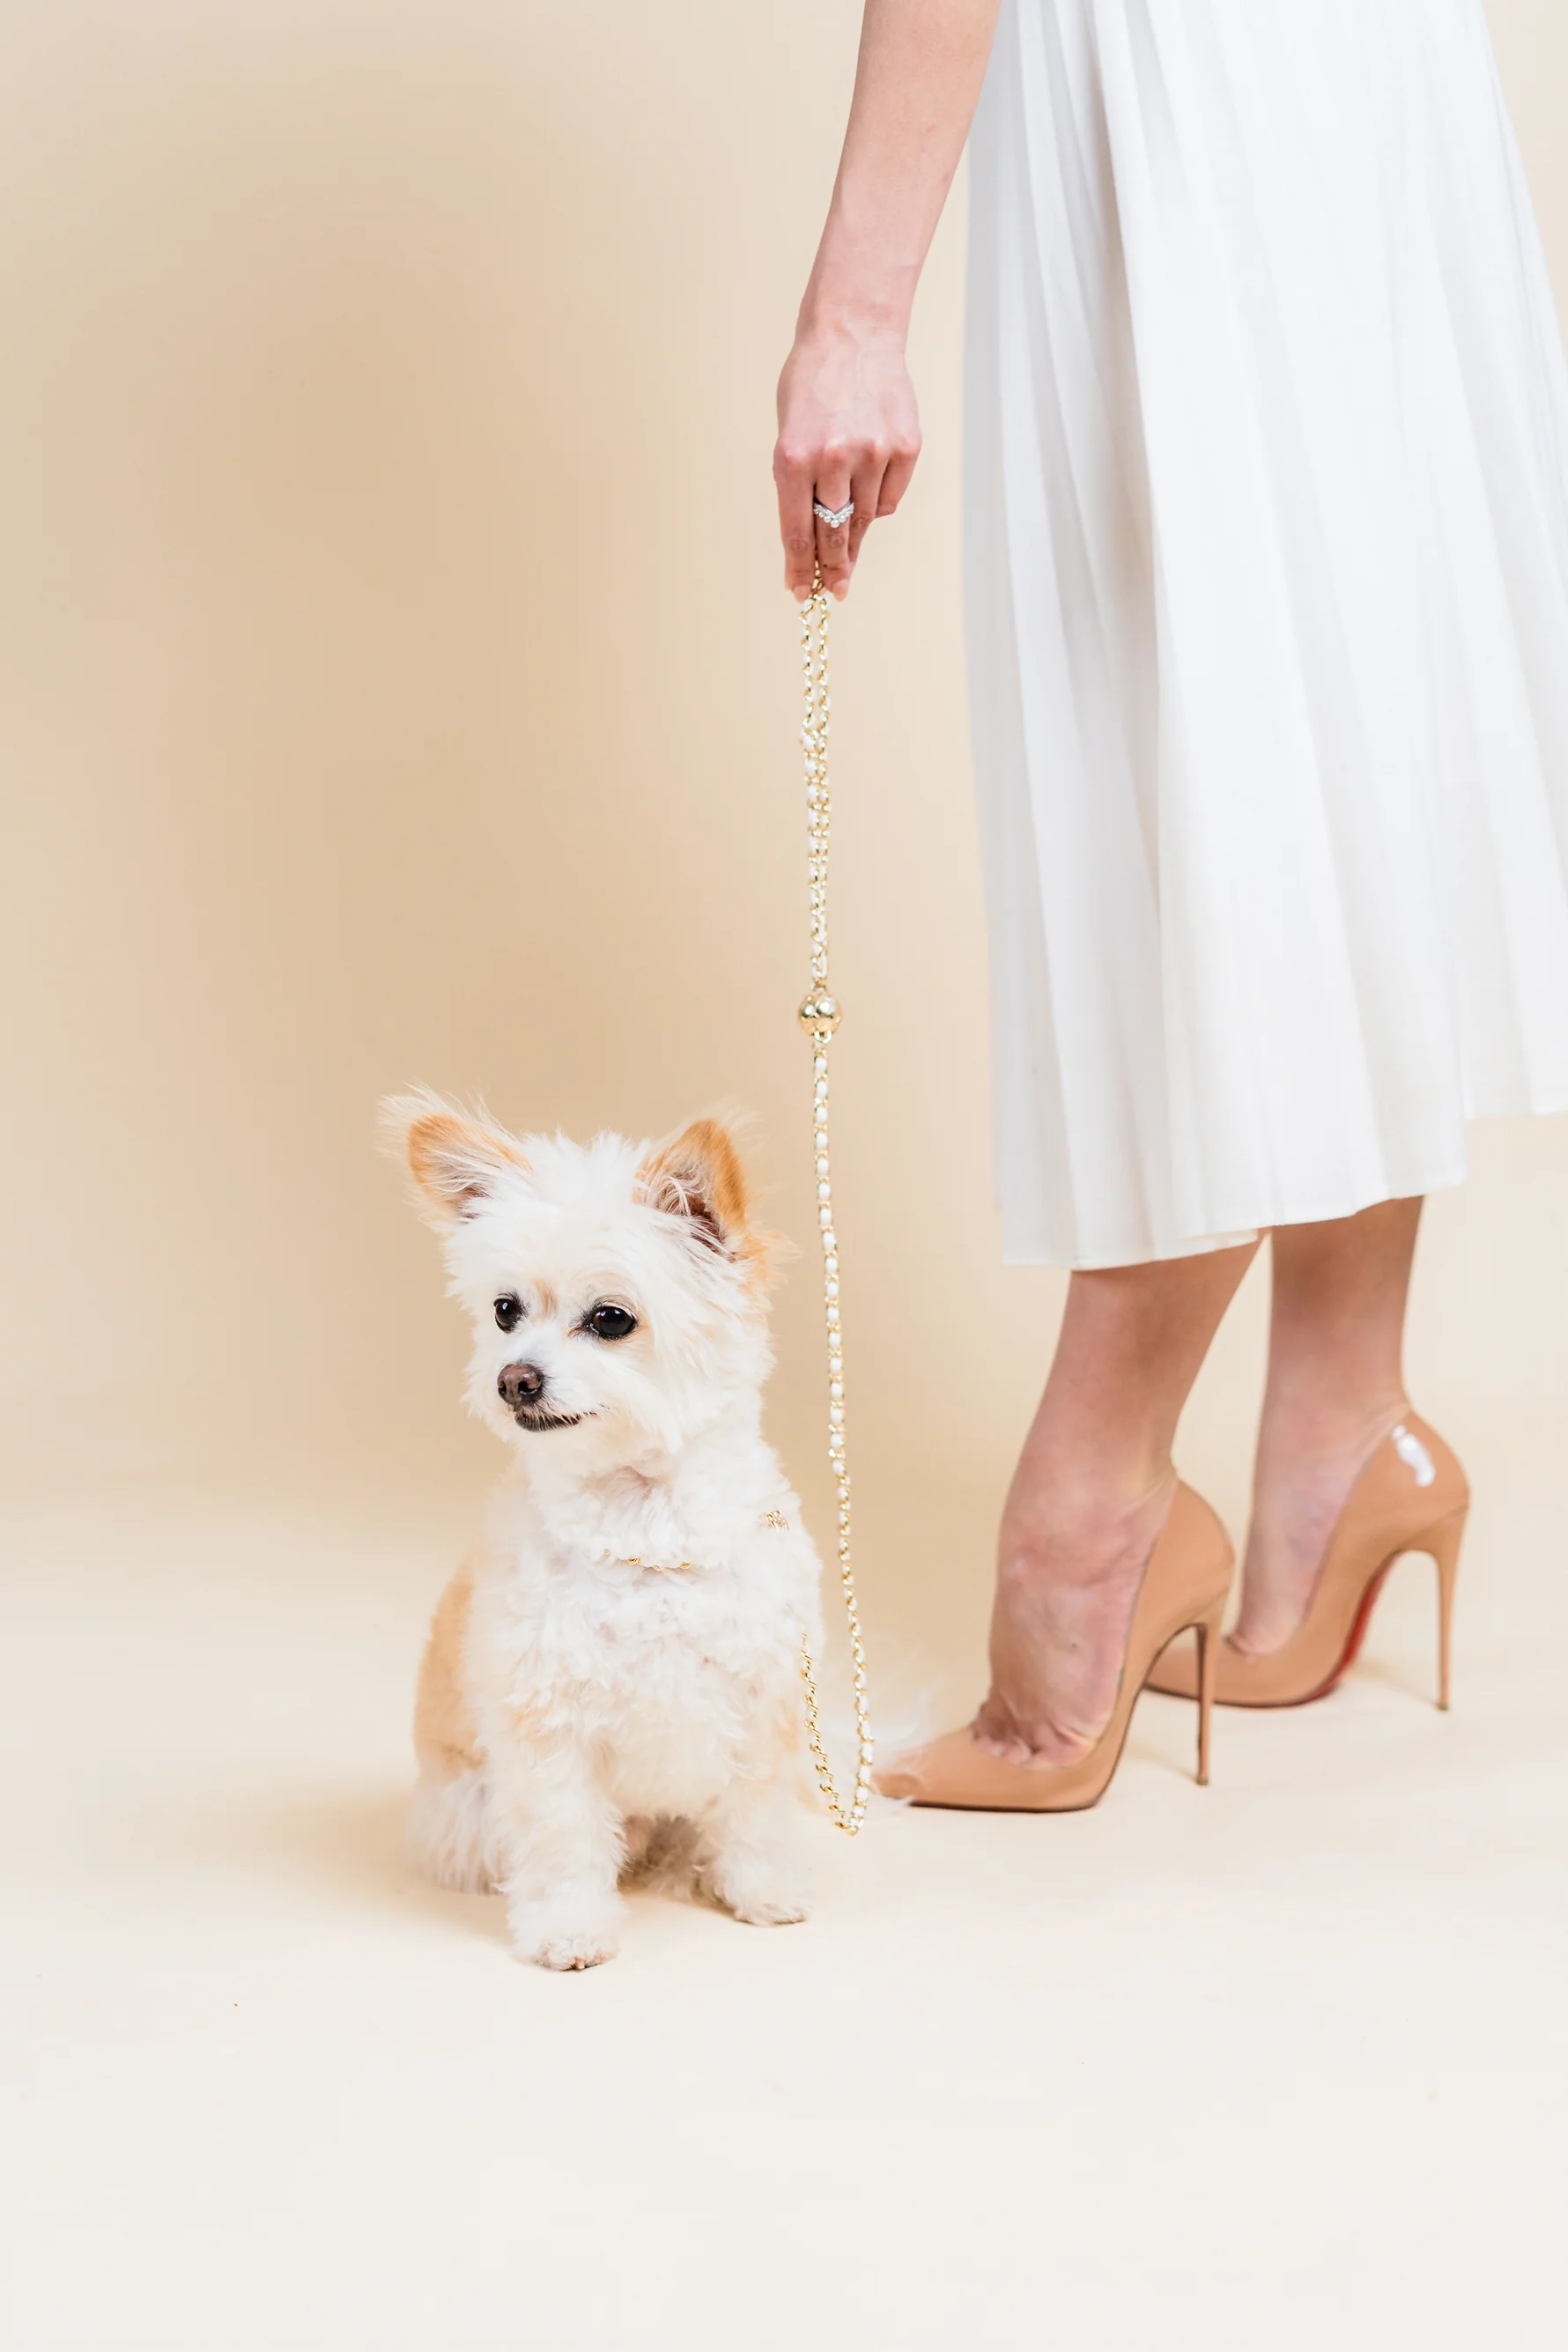 a woman in a white dress and high heels holding a dog leash